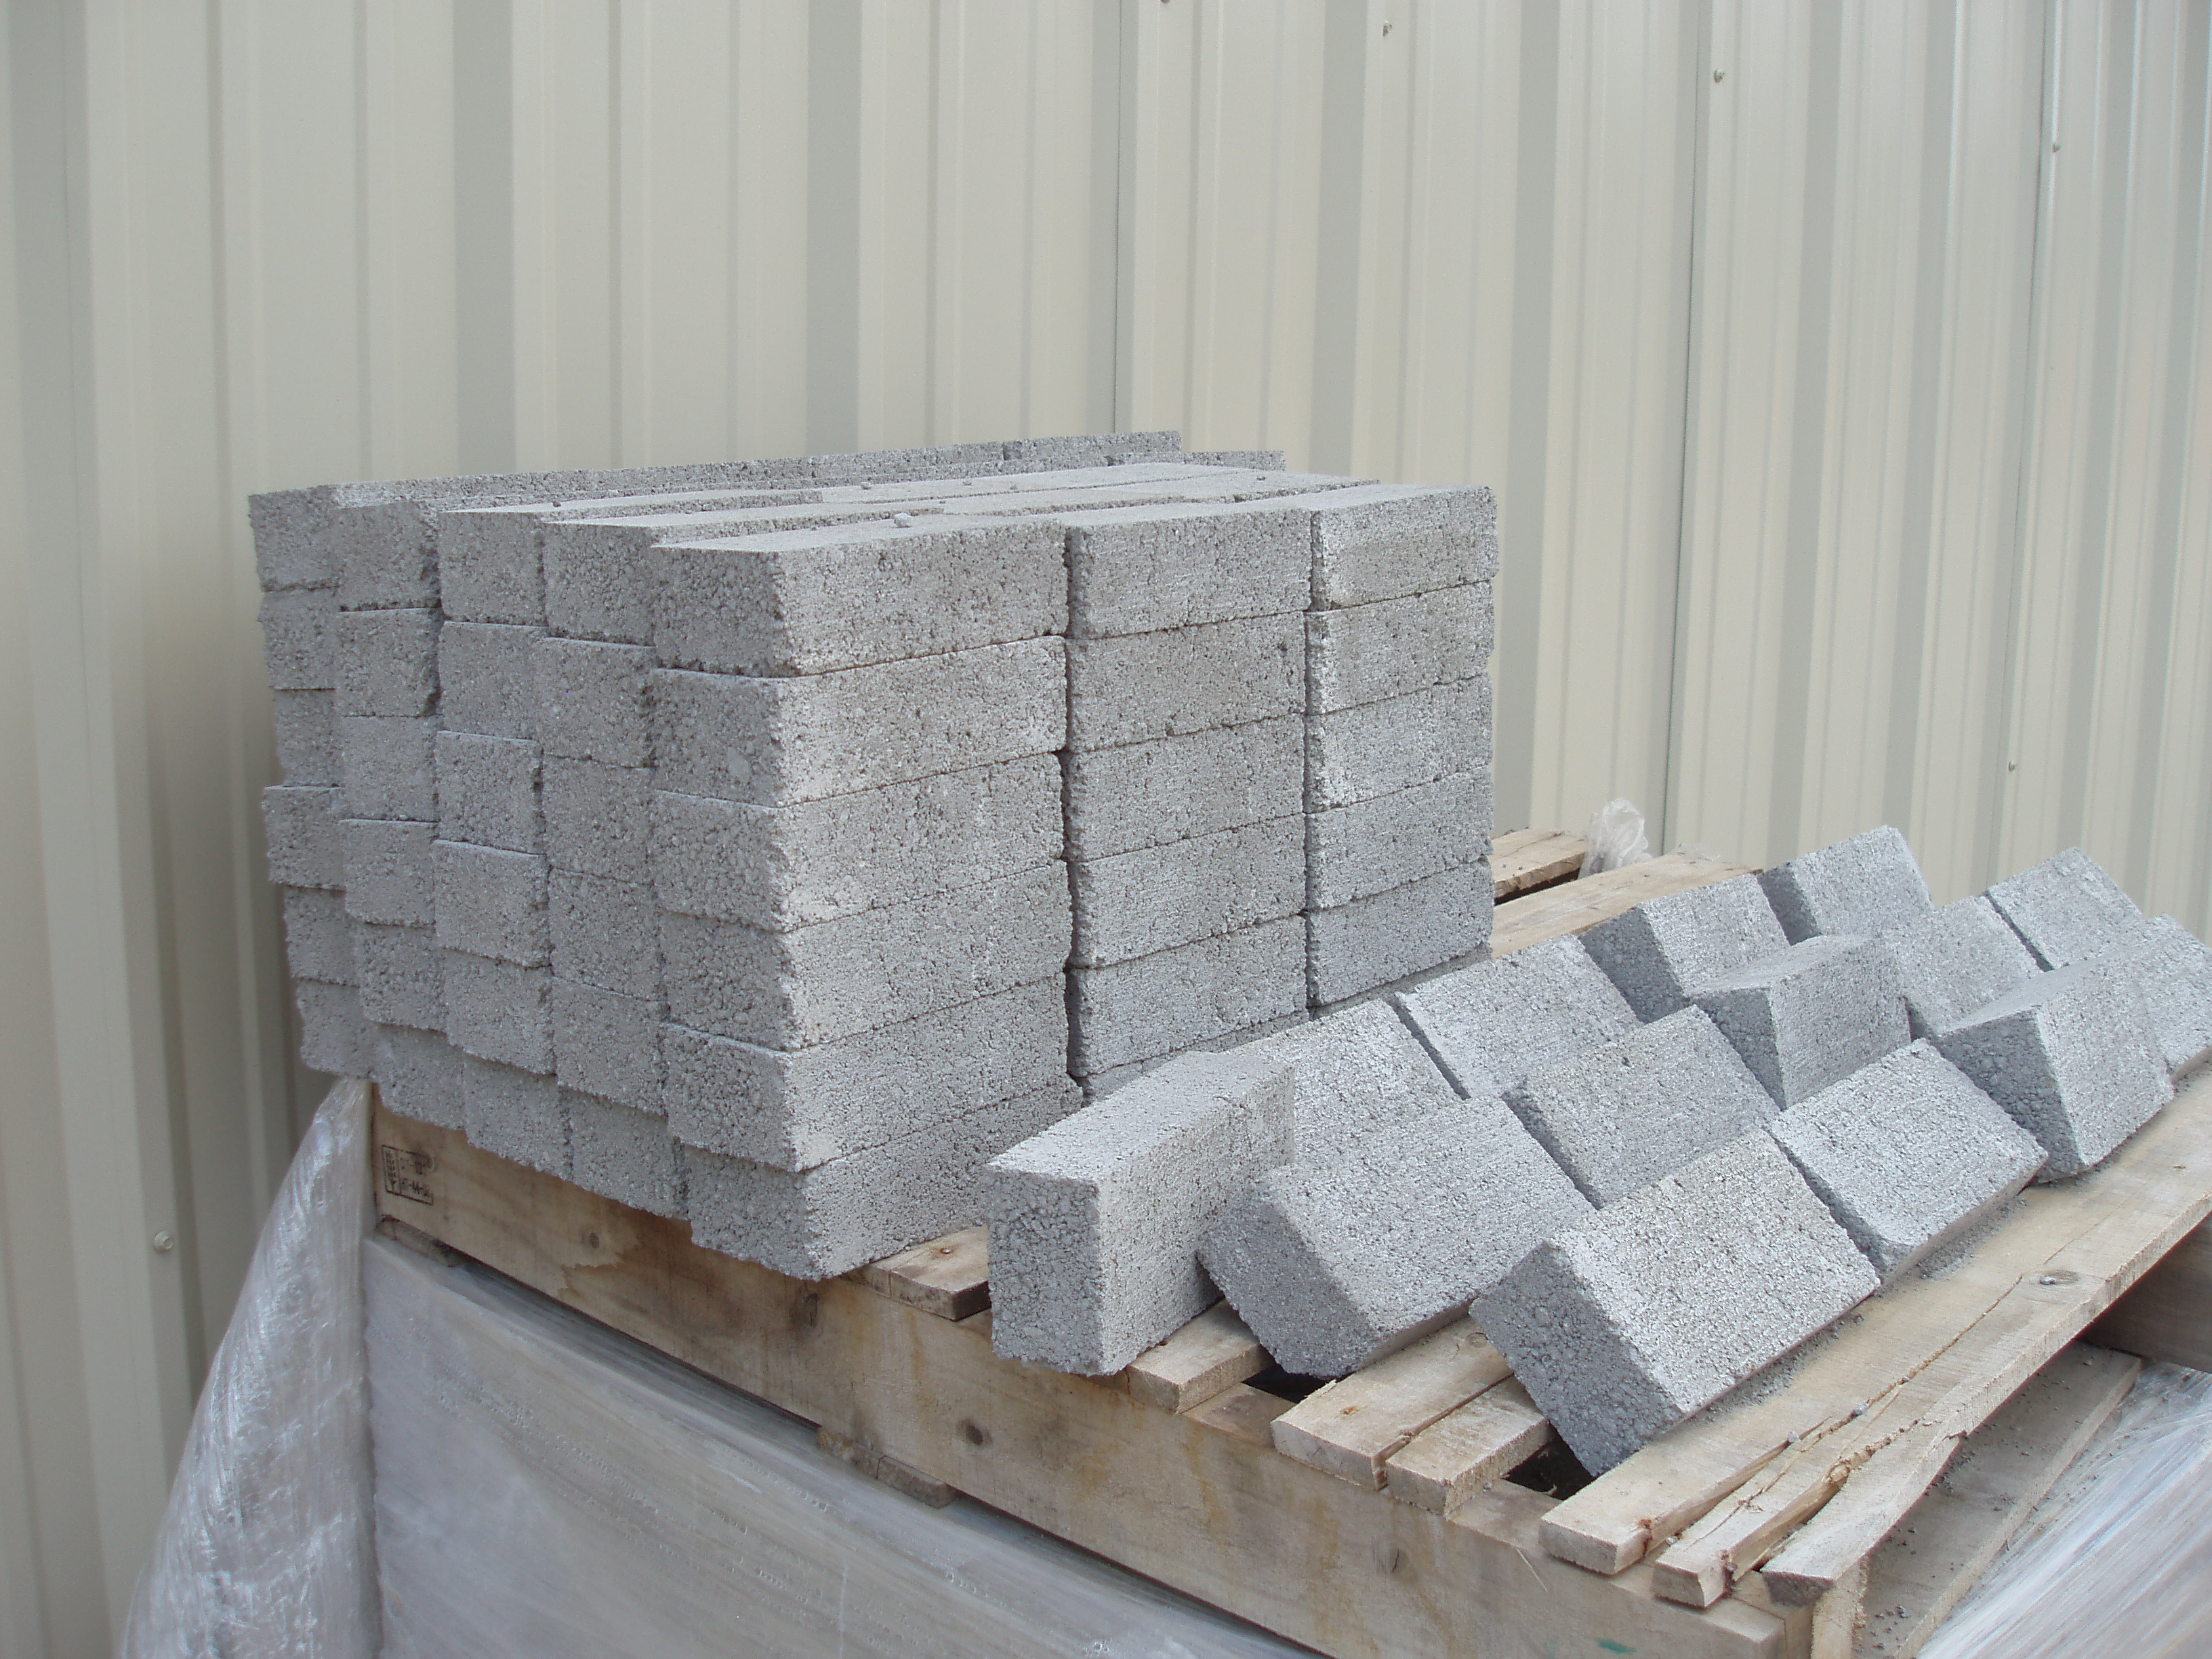 Supports for Wire Mesh and Rebar - Concrete Bricks